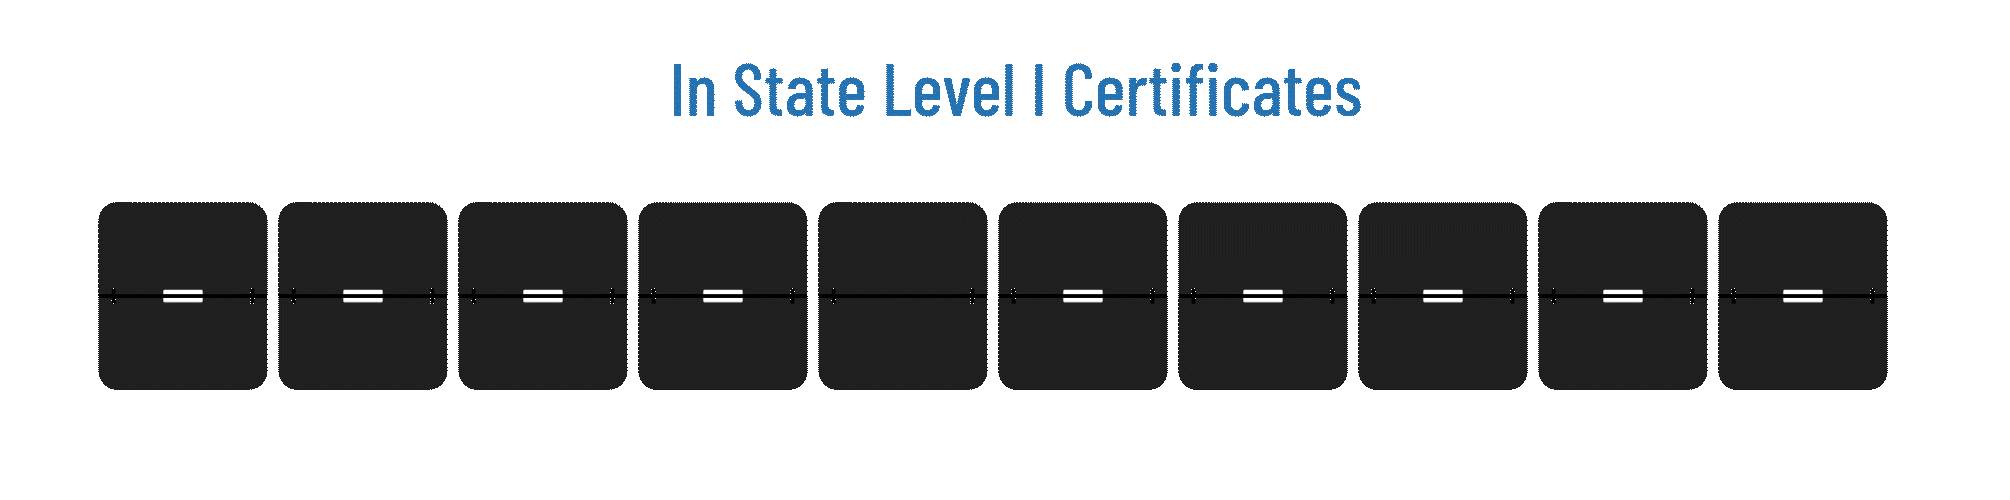 In State Level I Certificates - Less than 1 week